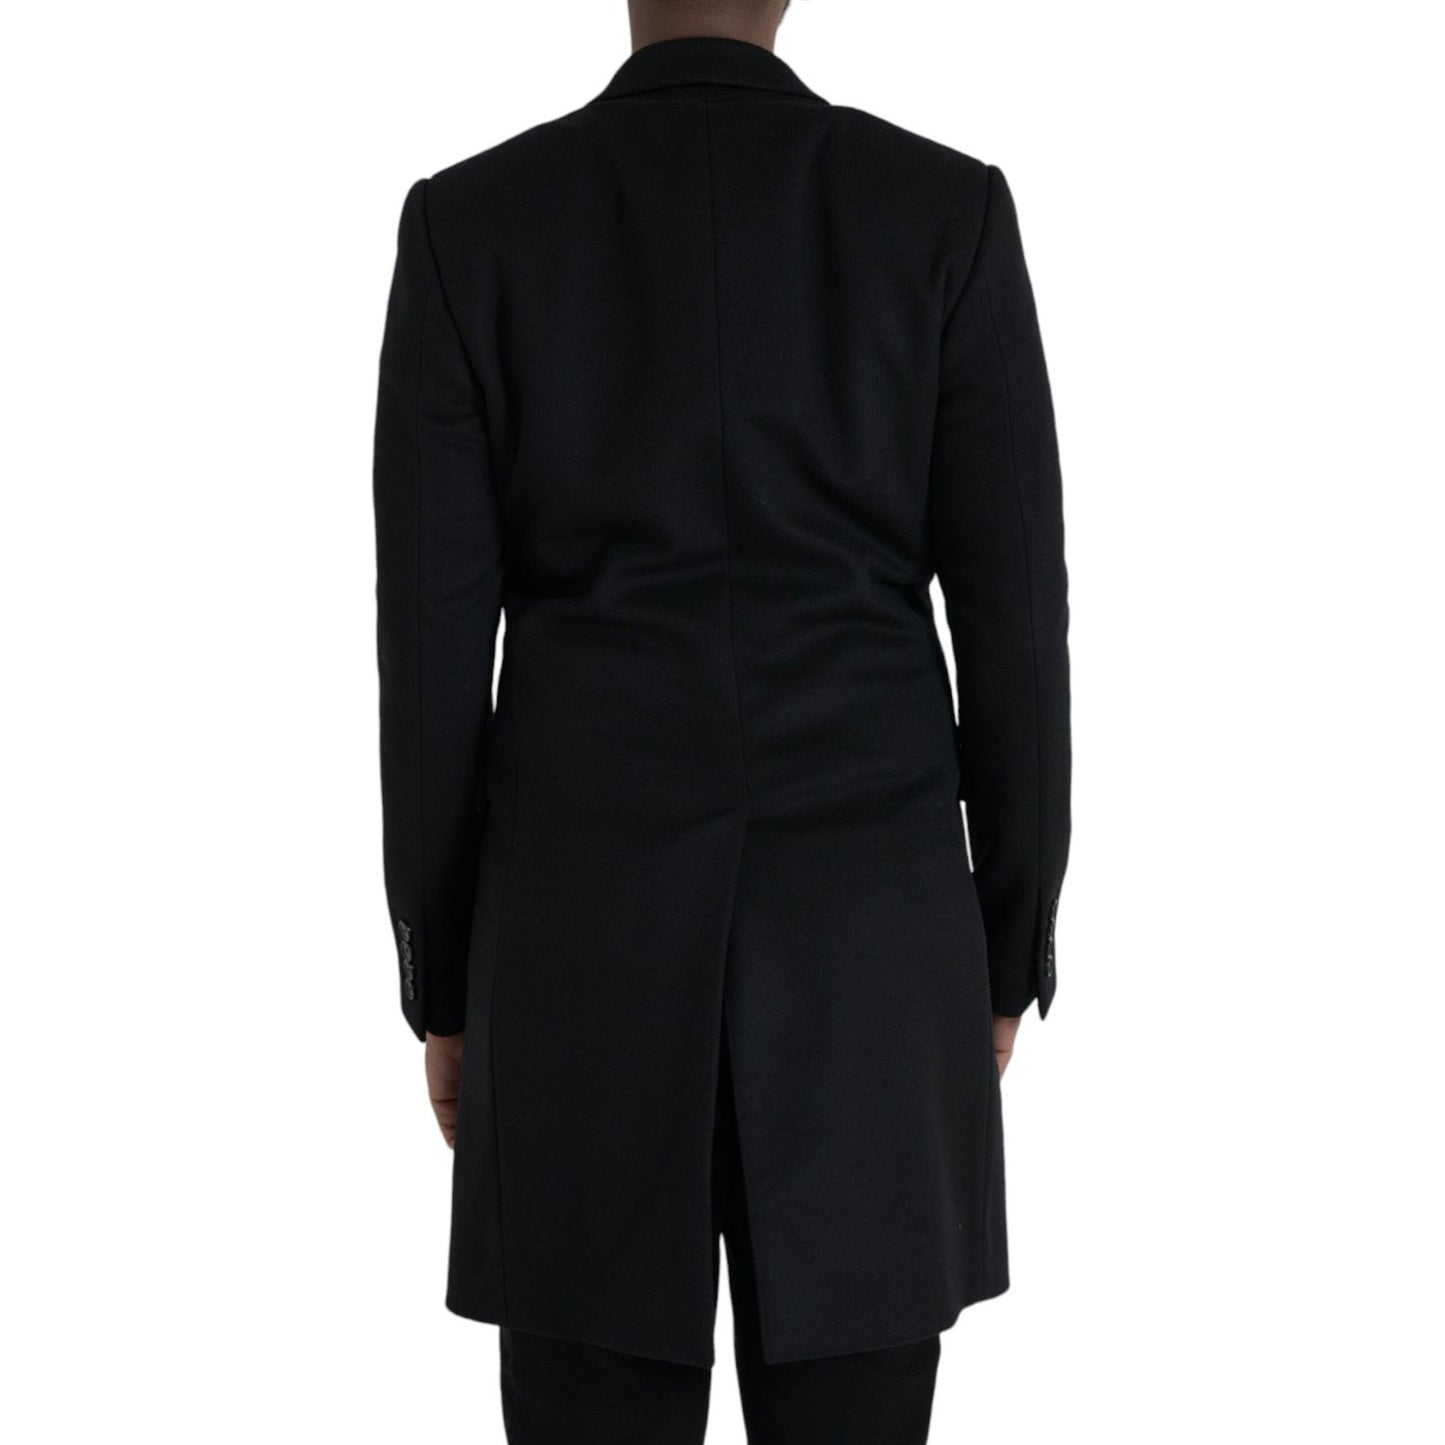 Dolce & Gabbana Black Single Breasted Trench Coat Jacket black-single-breasted-trench-coat-jacket